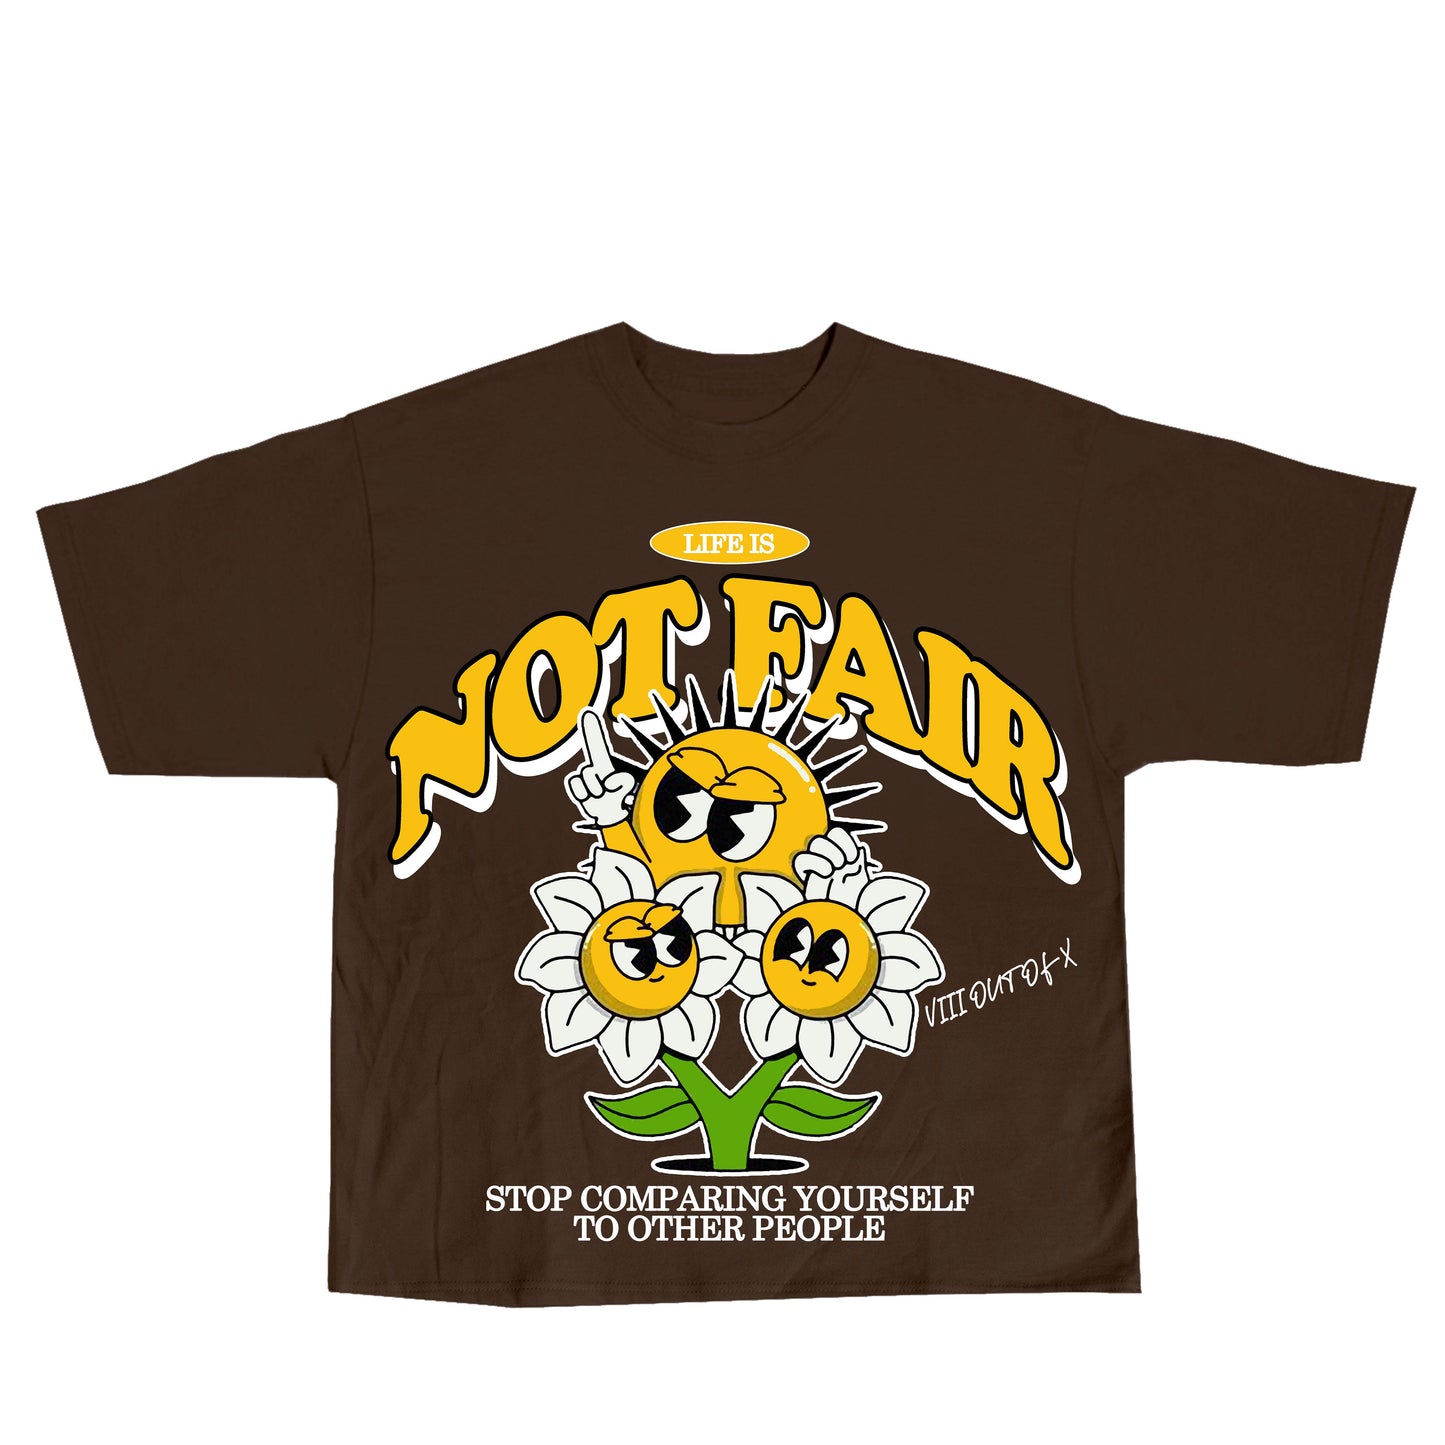 *PRE-ORDER* VIII Out Of X "Life Is Not Fair" T-Shirt (Brown)